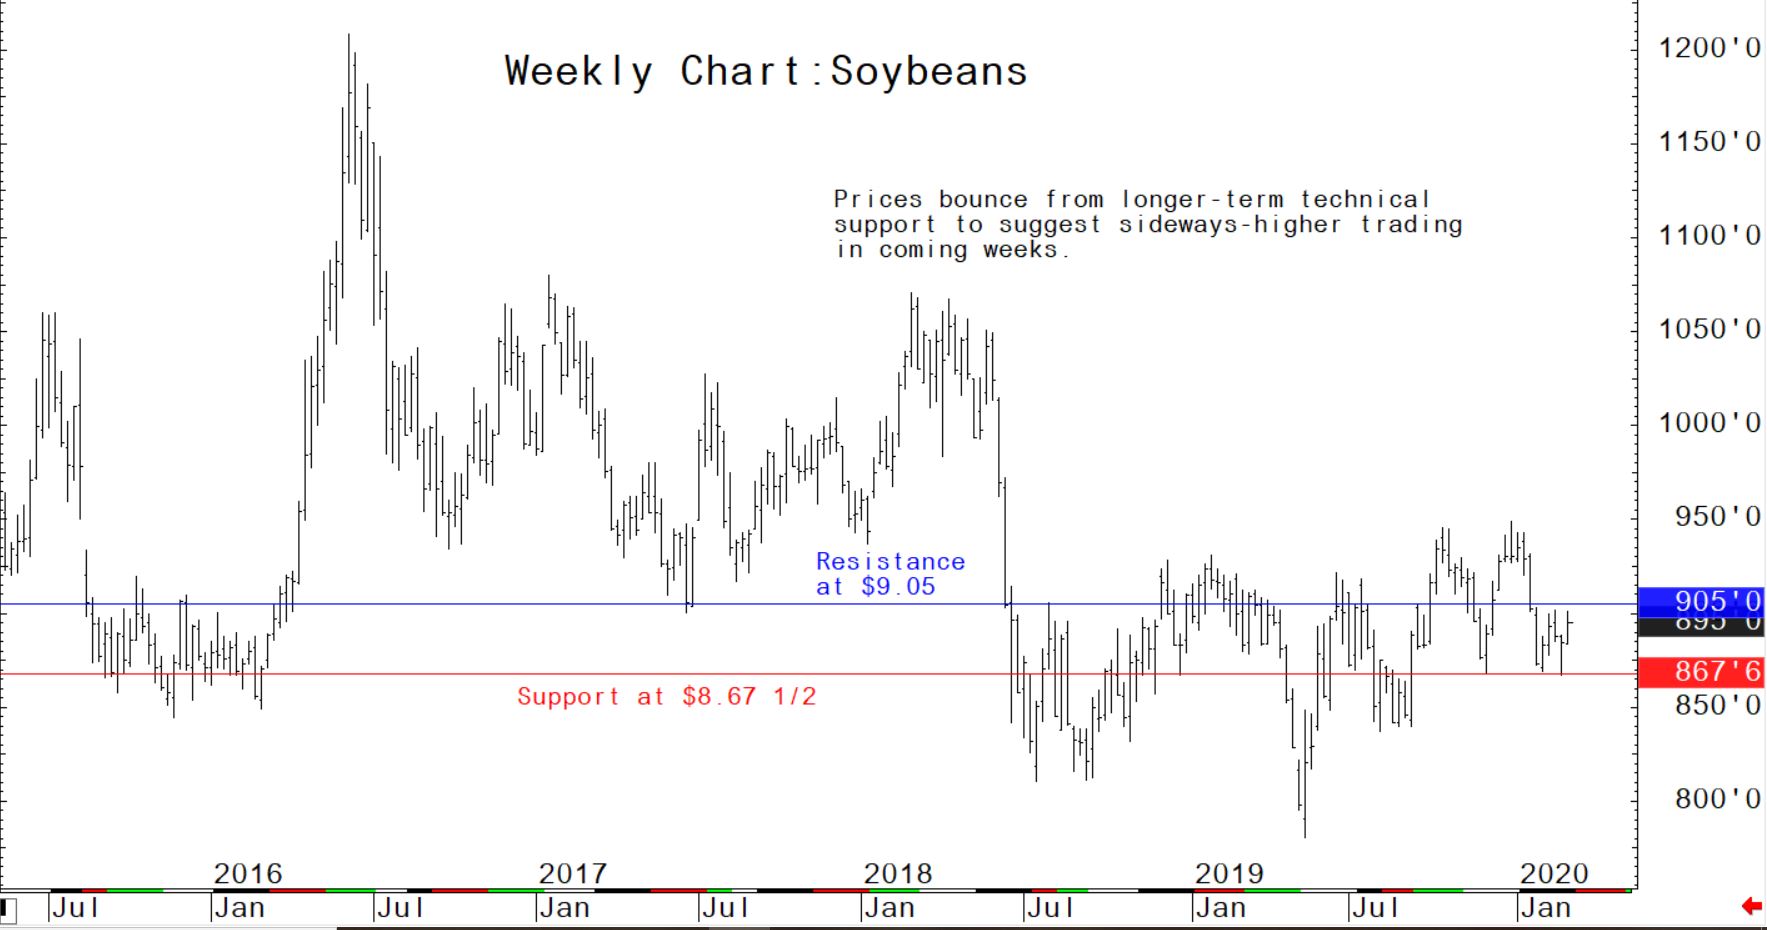 Prices bounce from longer-term technical support to suggest sideways-higher trading in coming weeks